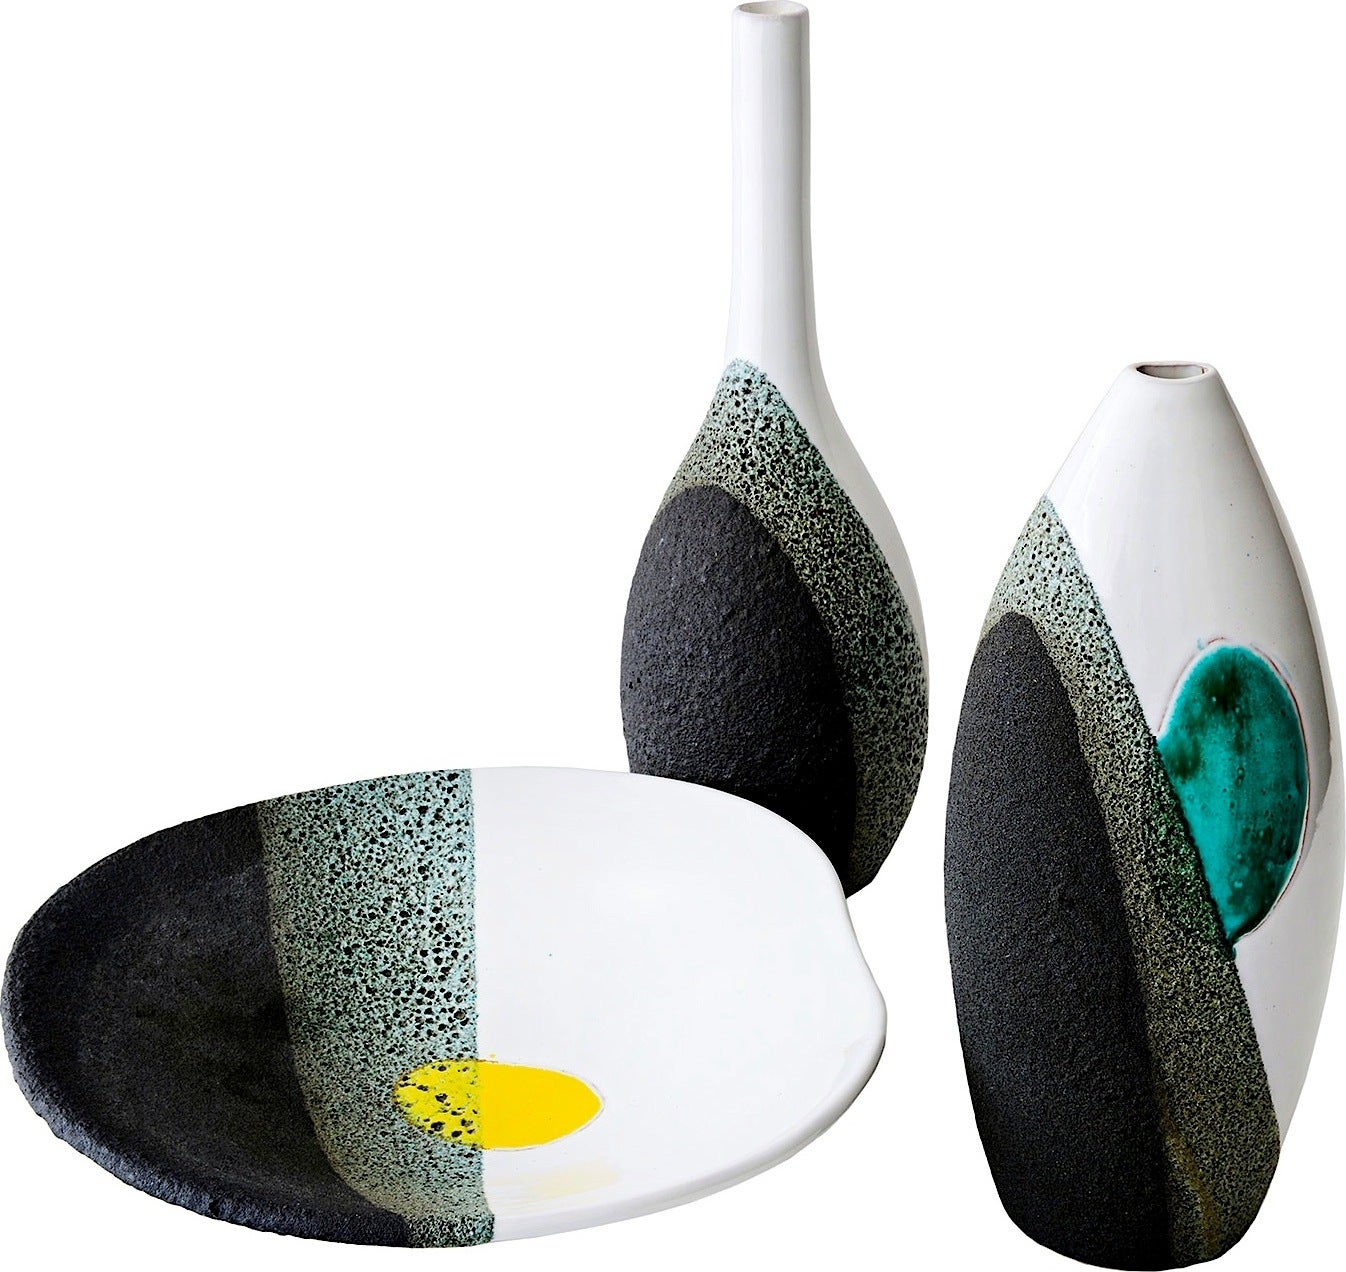 Early Ceramics by Ettore Sottsass